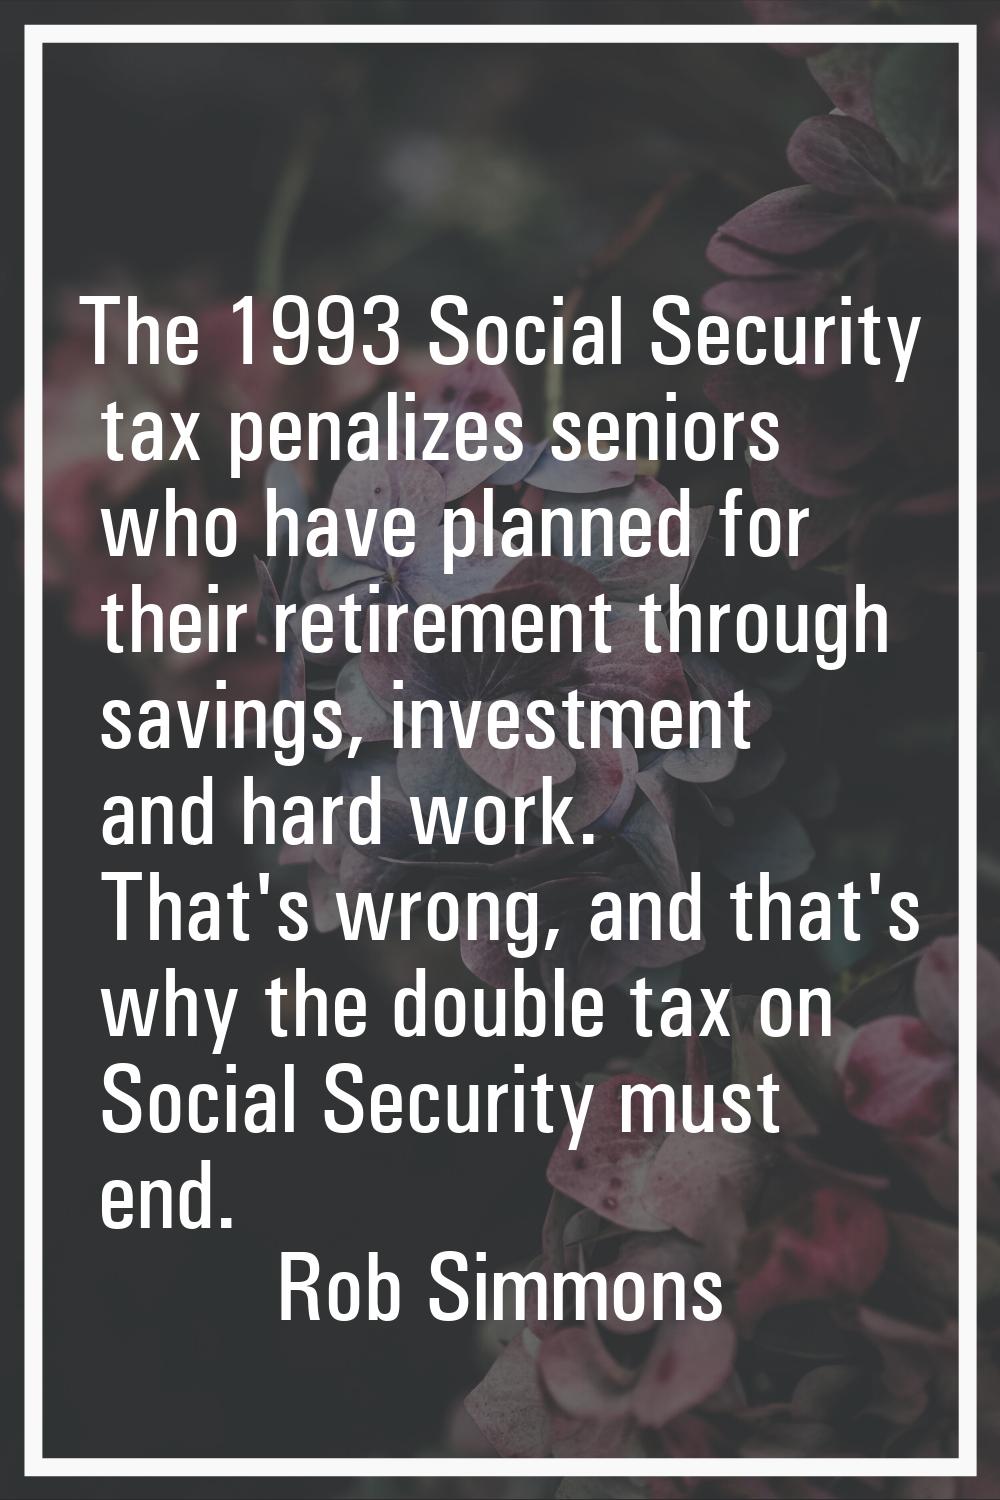 The 1993 Social Security tax penalizes seniors who have planned for their retirement through saving